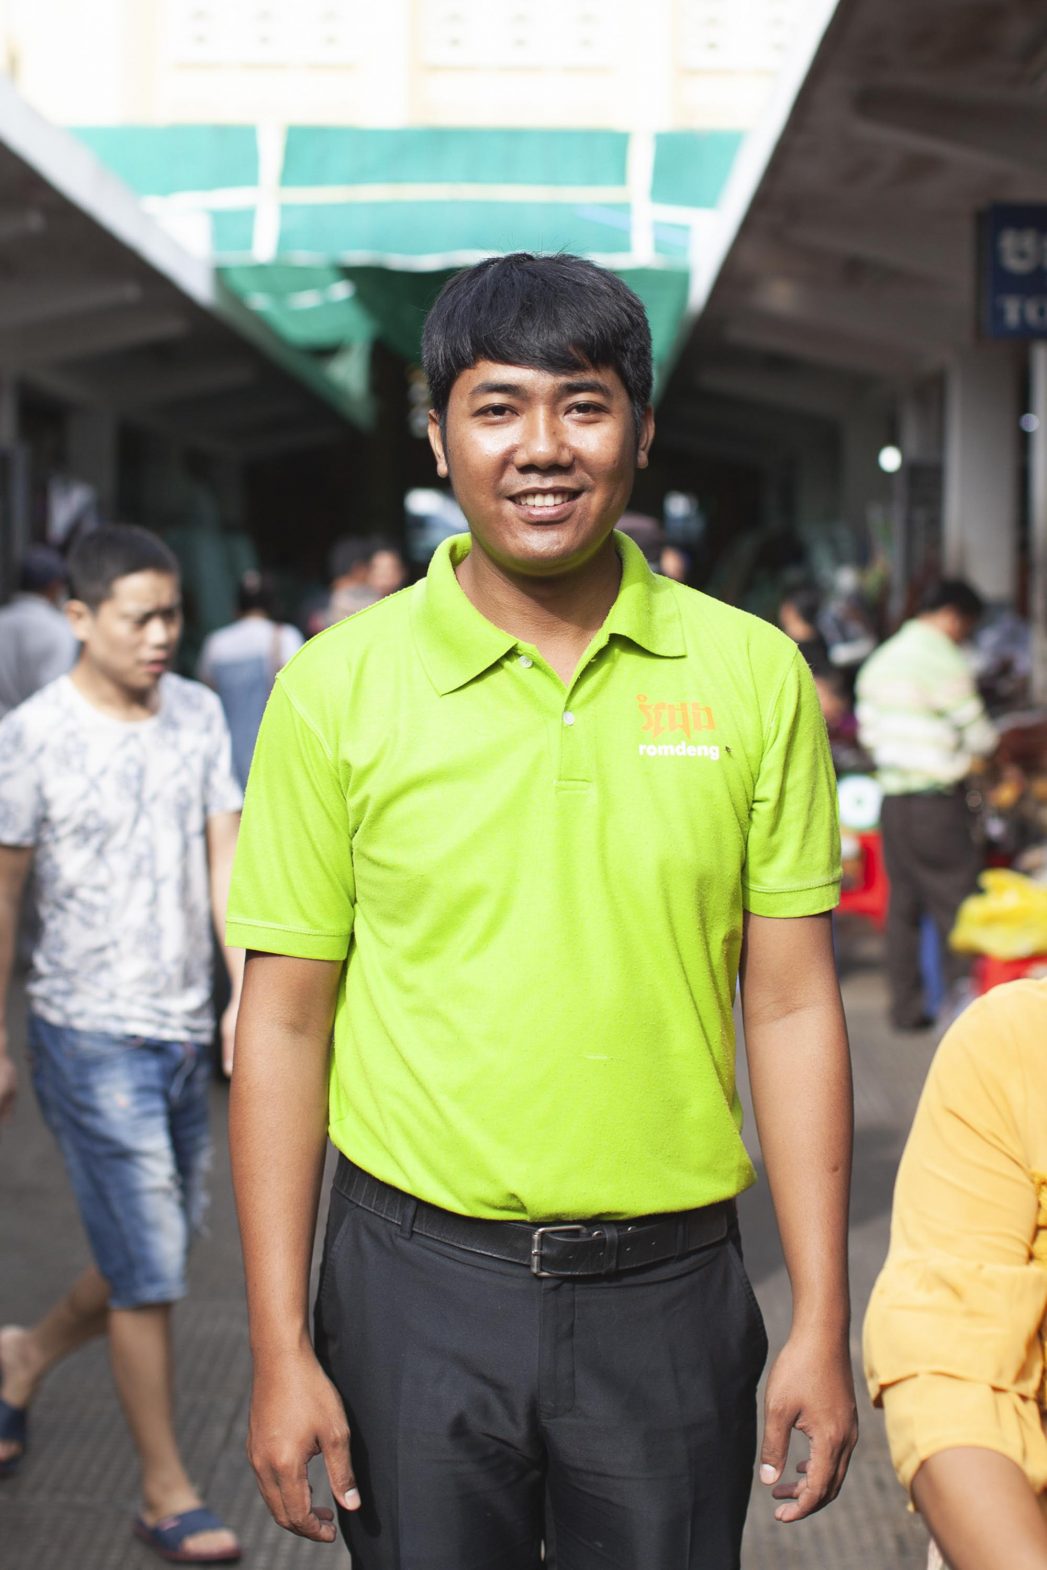 Once living on the streets, Ouch is now the assistant manager of Phnom Pemh's popular Romdeng restaurant.